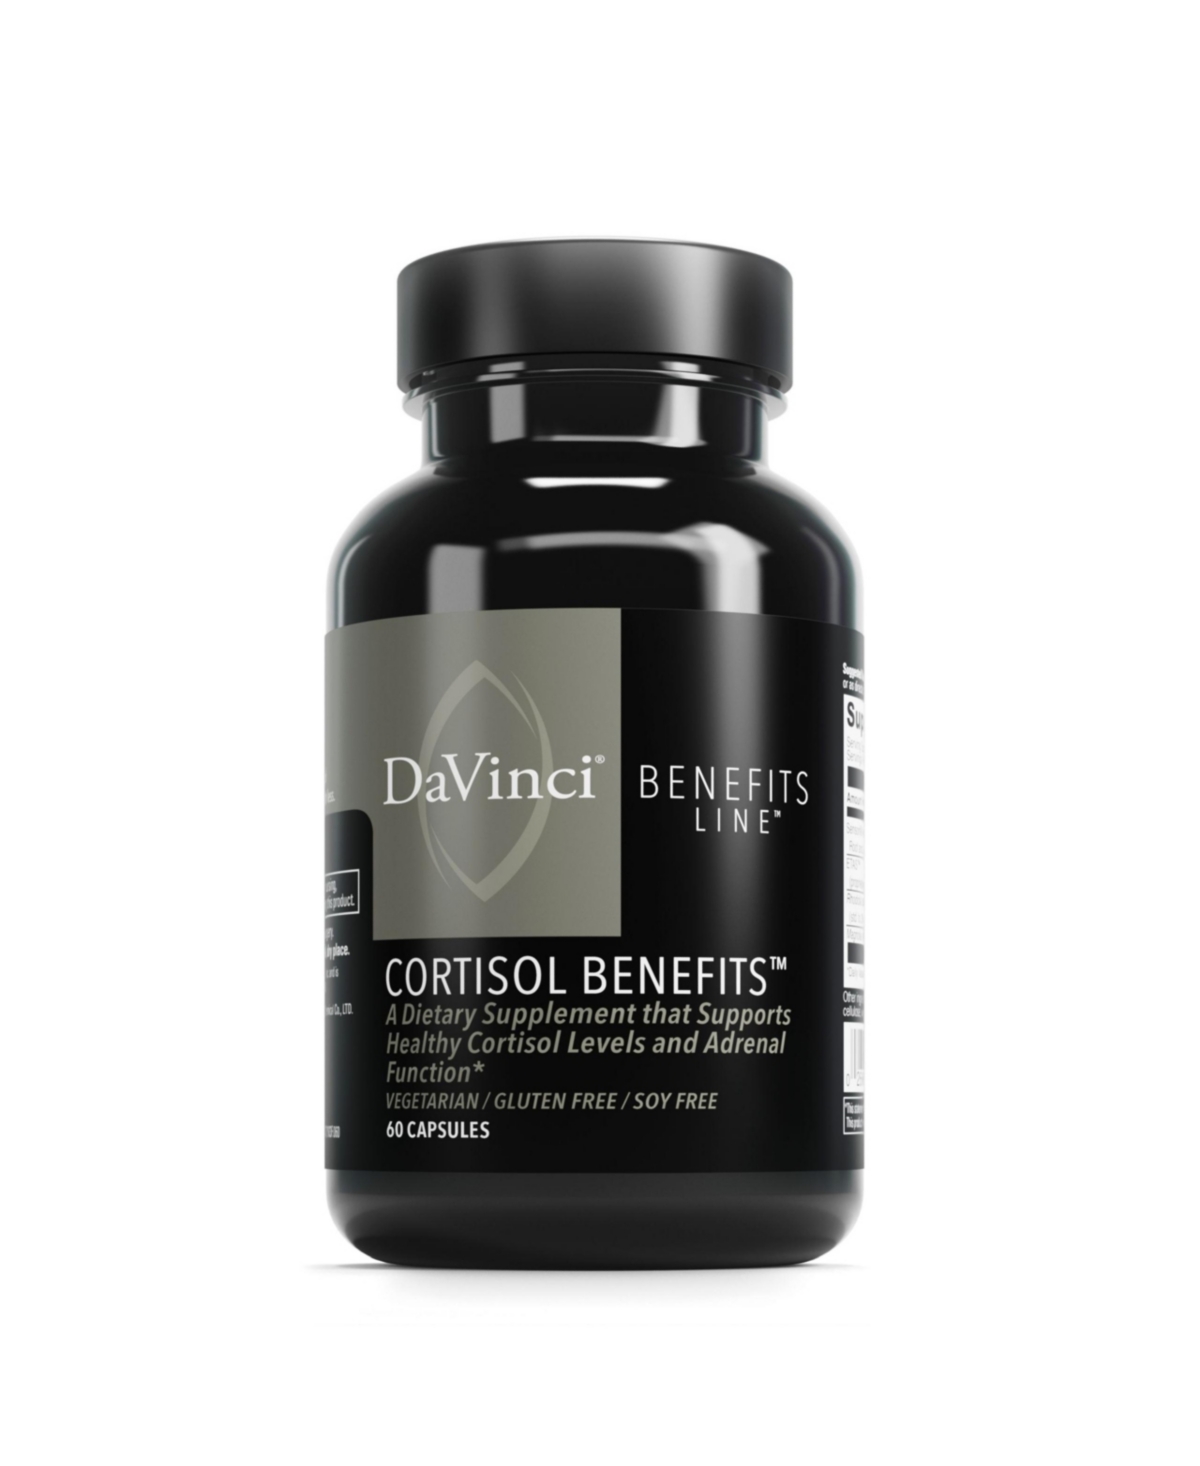 DaVinci Labs Cortisol Benefits - Dietary Supplement to Support Healthy Cortisol Levels and Adrenal Health - With Ashwagandha Extr